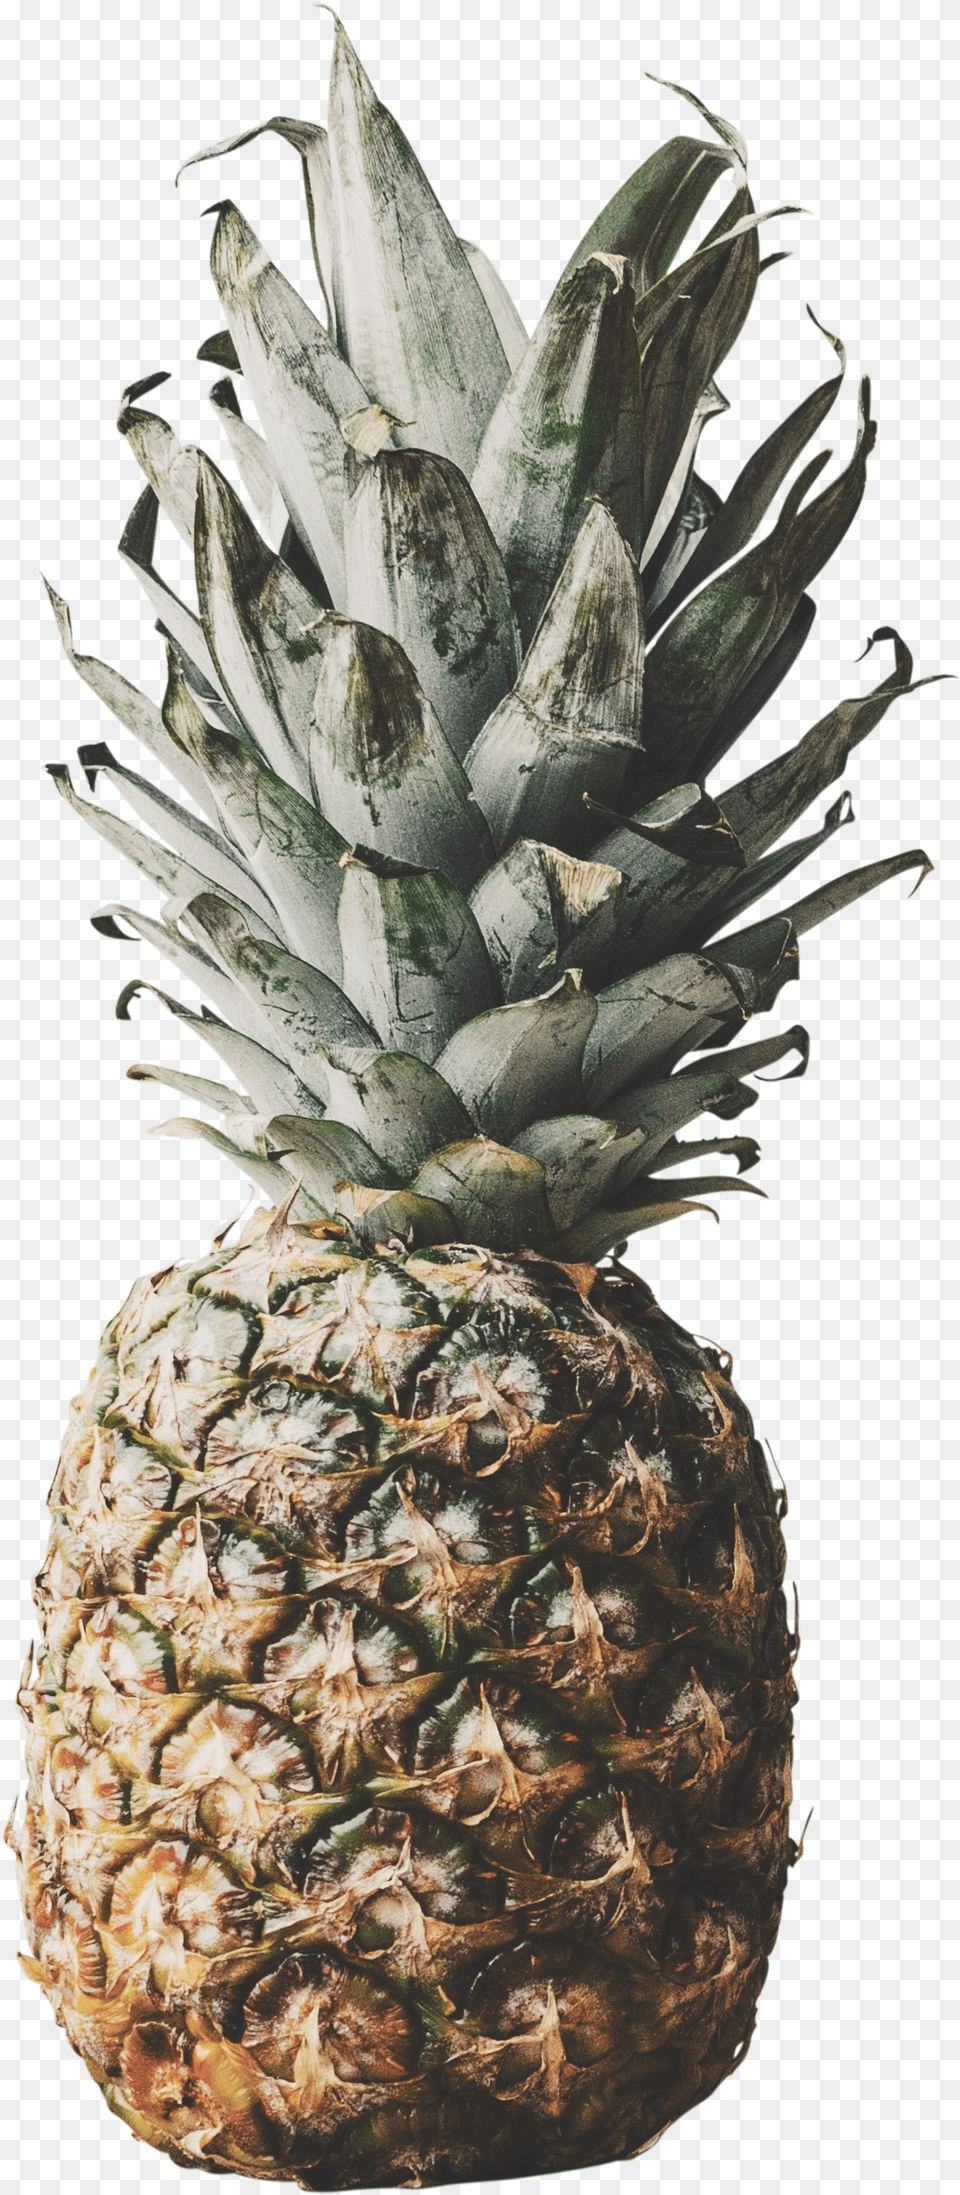 Pineapple Png Image